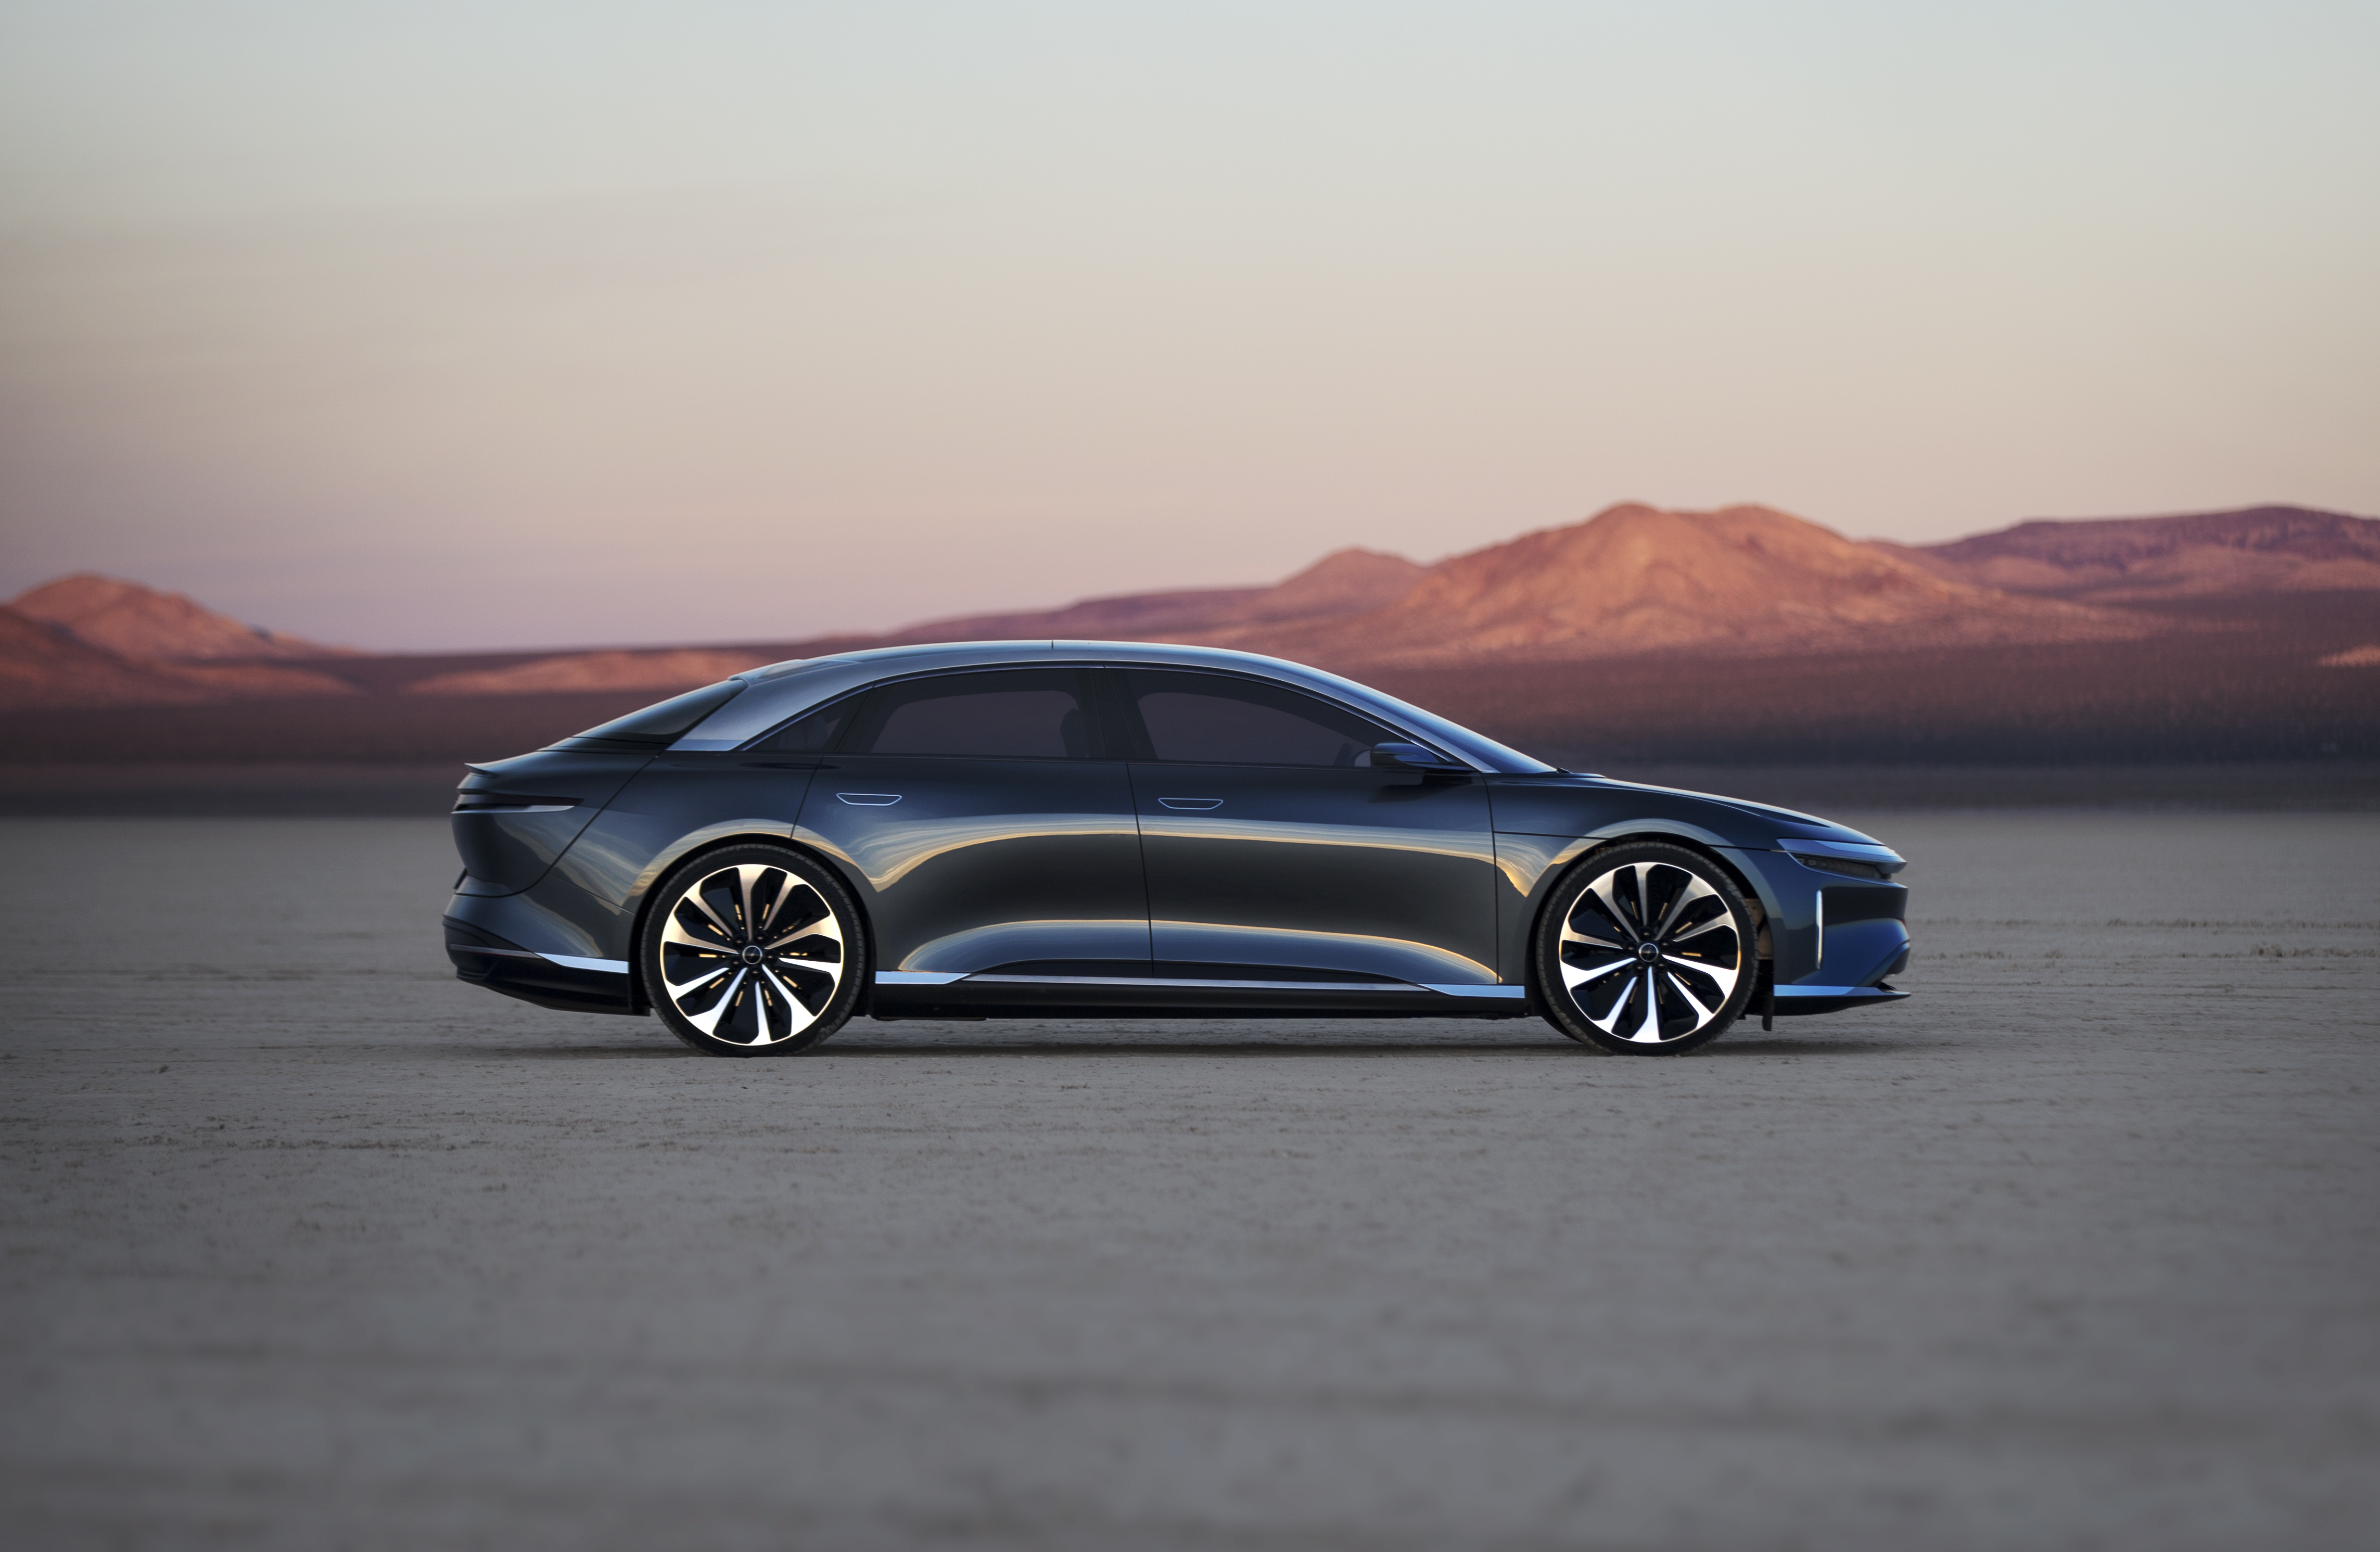 Cover image for  article: EV Startup Lucid Motors Goes for the Brand Experience